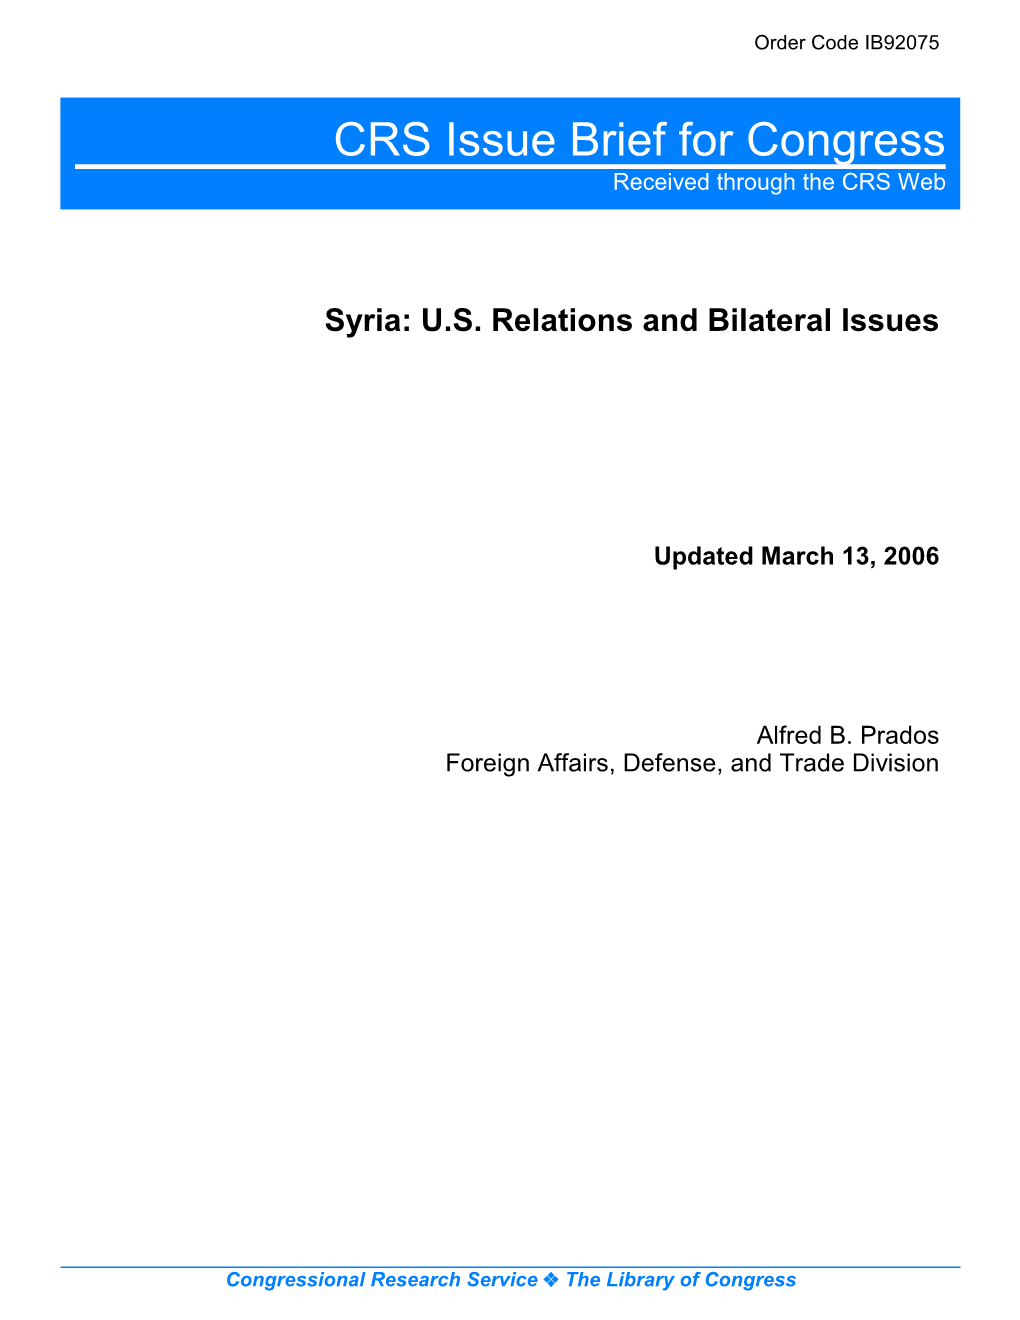 Syria: U.S. Relations and Bilateral Issues